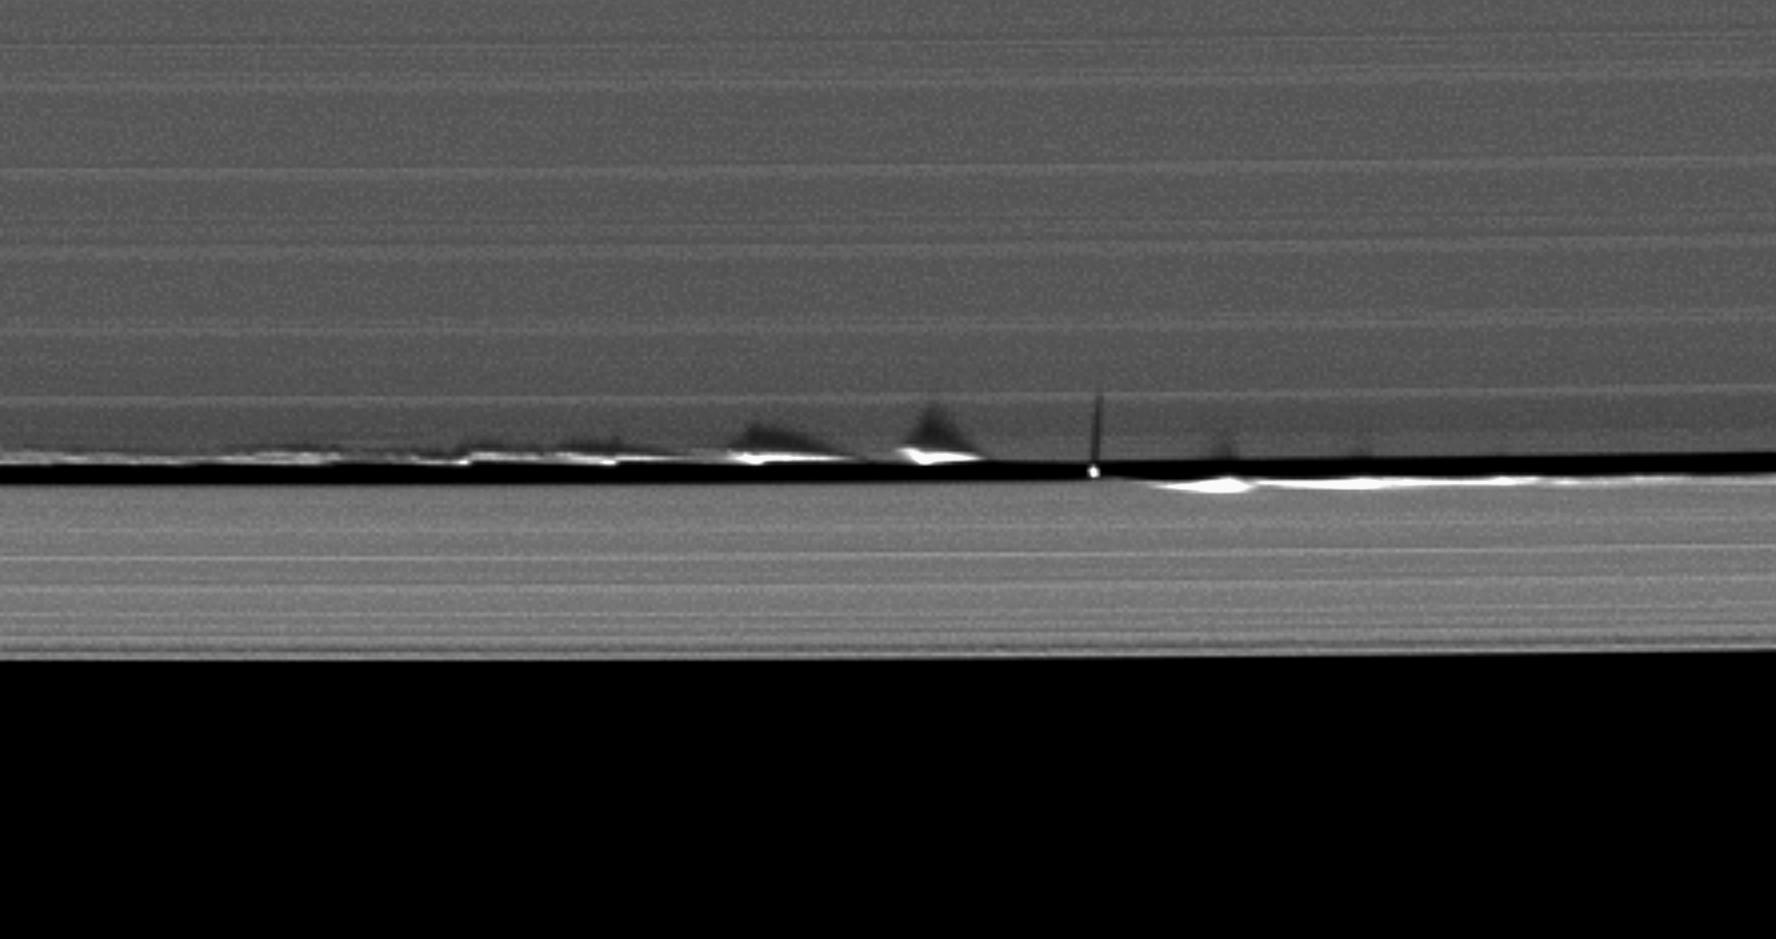 Never-before-seen looming vertical structures created by the tiny moon Daphnis